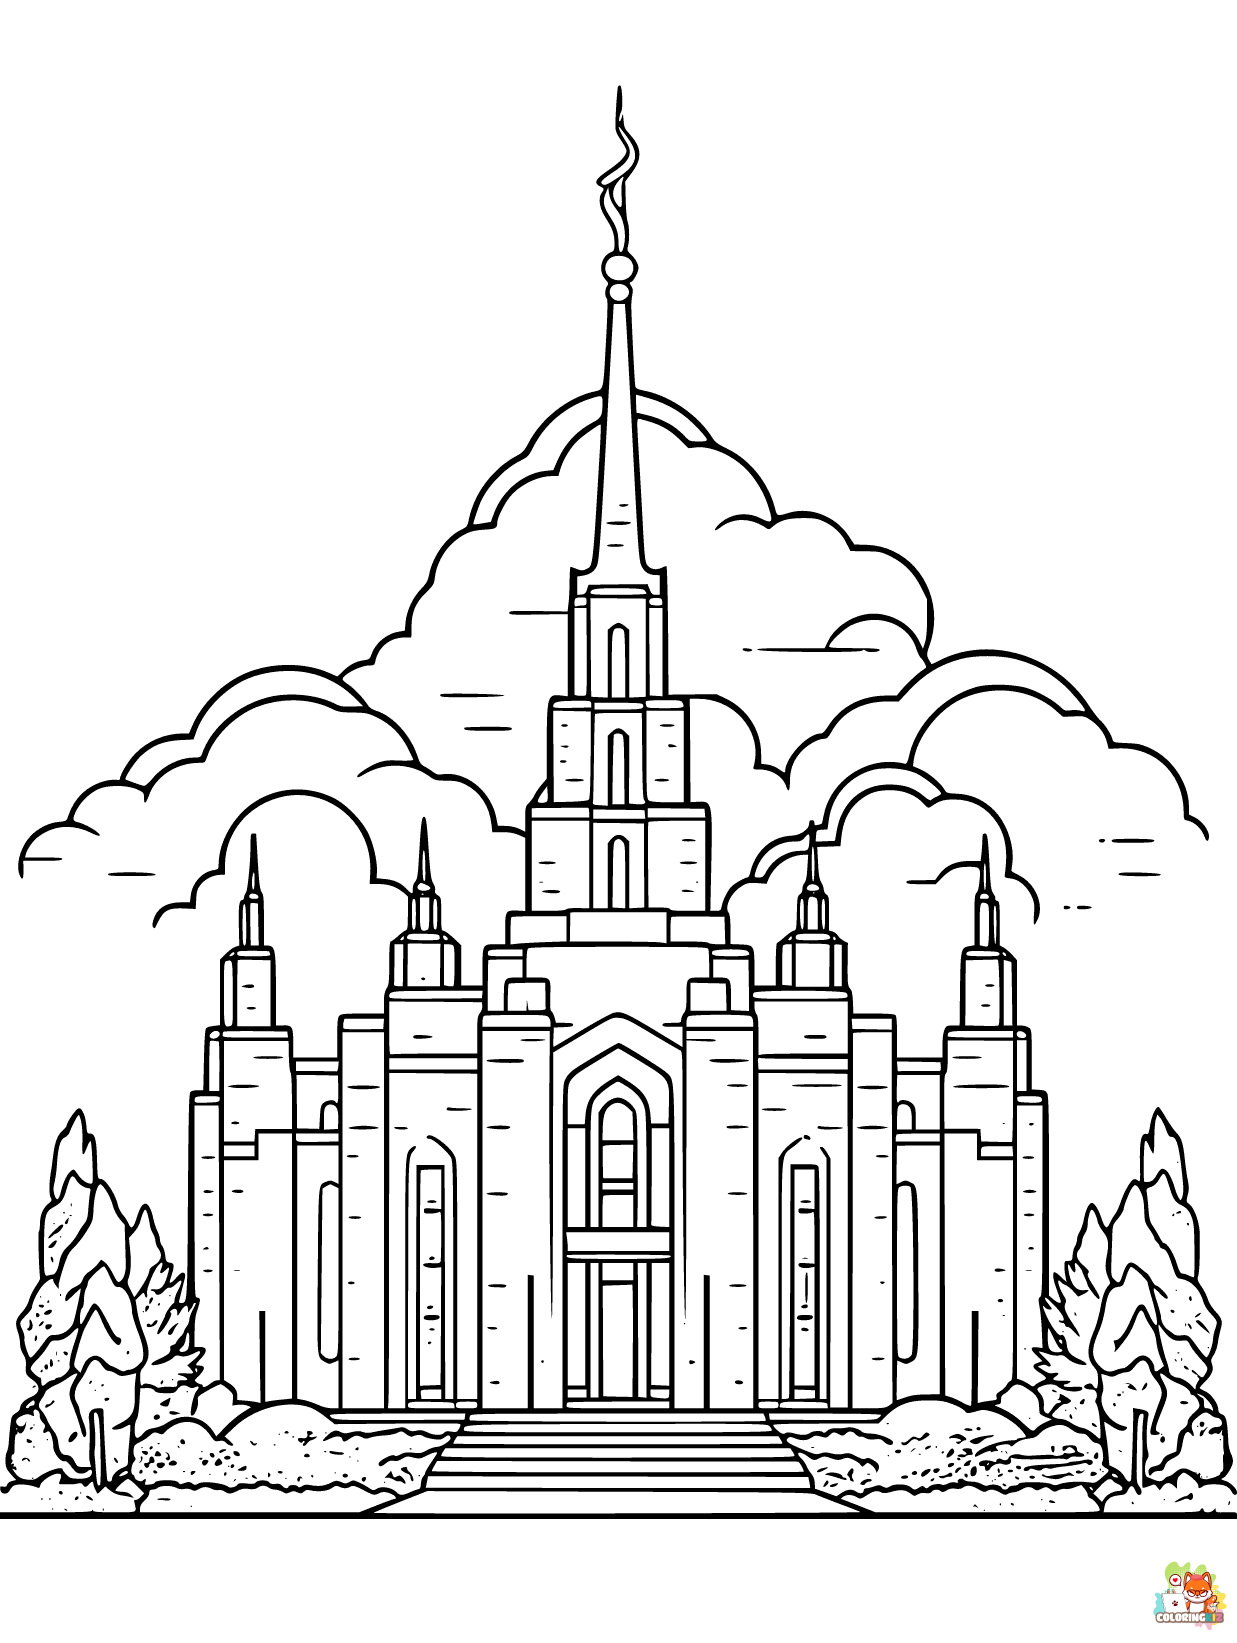 LDS Temple coloring pages printable 2